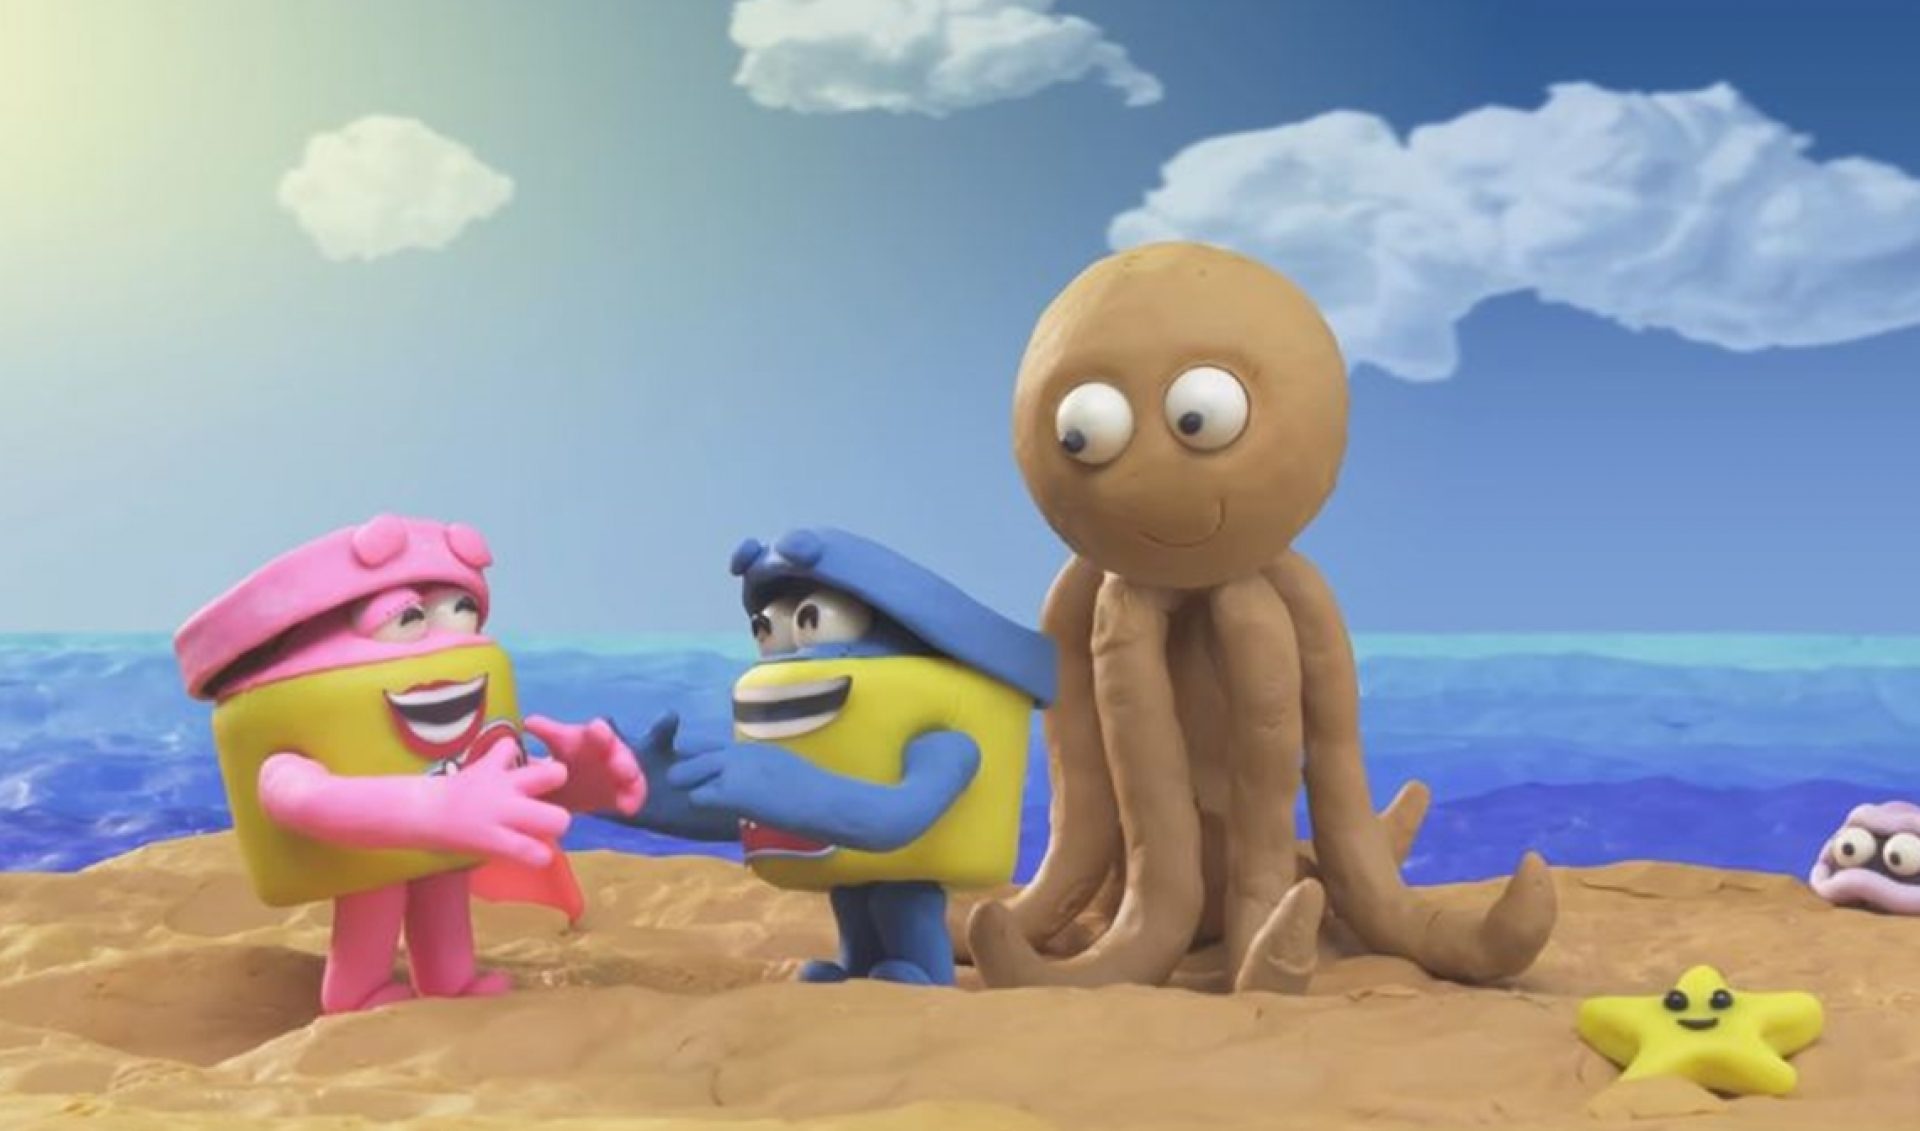 Hasbro Launches Stop Motion 'Play-Doh' Series On YouTube - Tubefilter